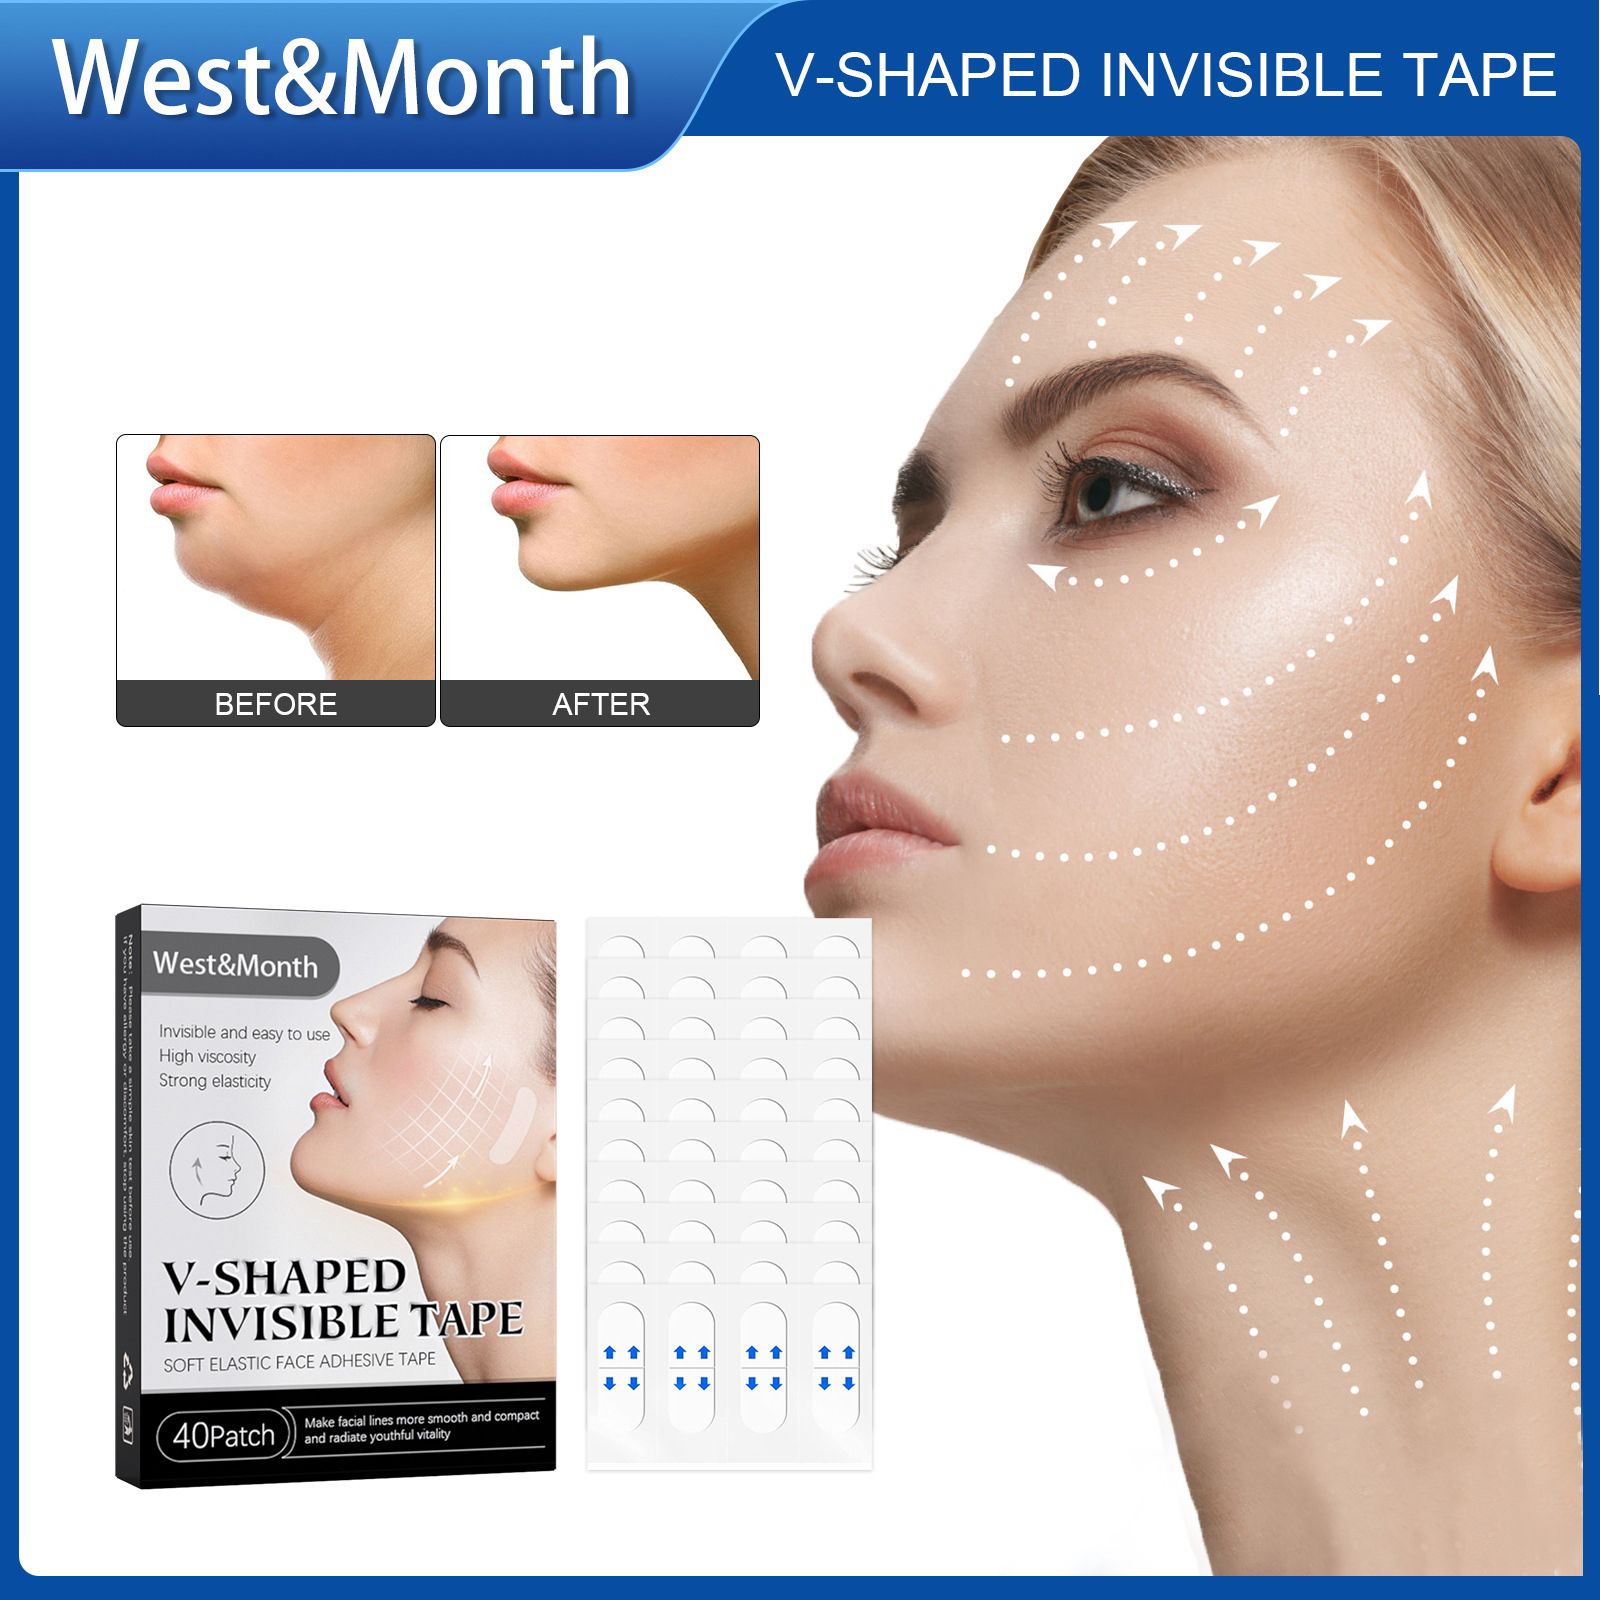 Cheap West&Month 40 Patch Soft Elastic Face Adhesive Tape V-shaped